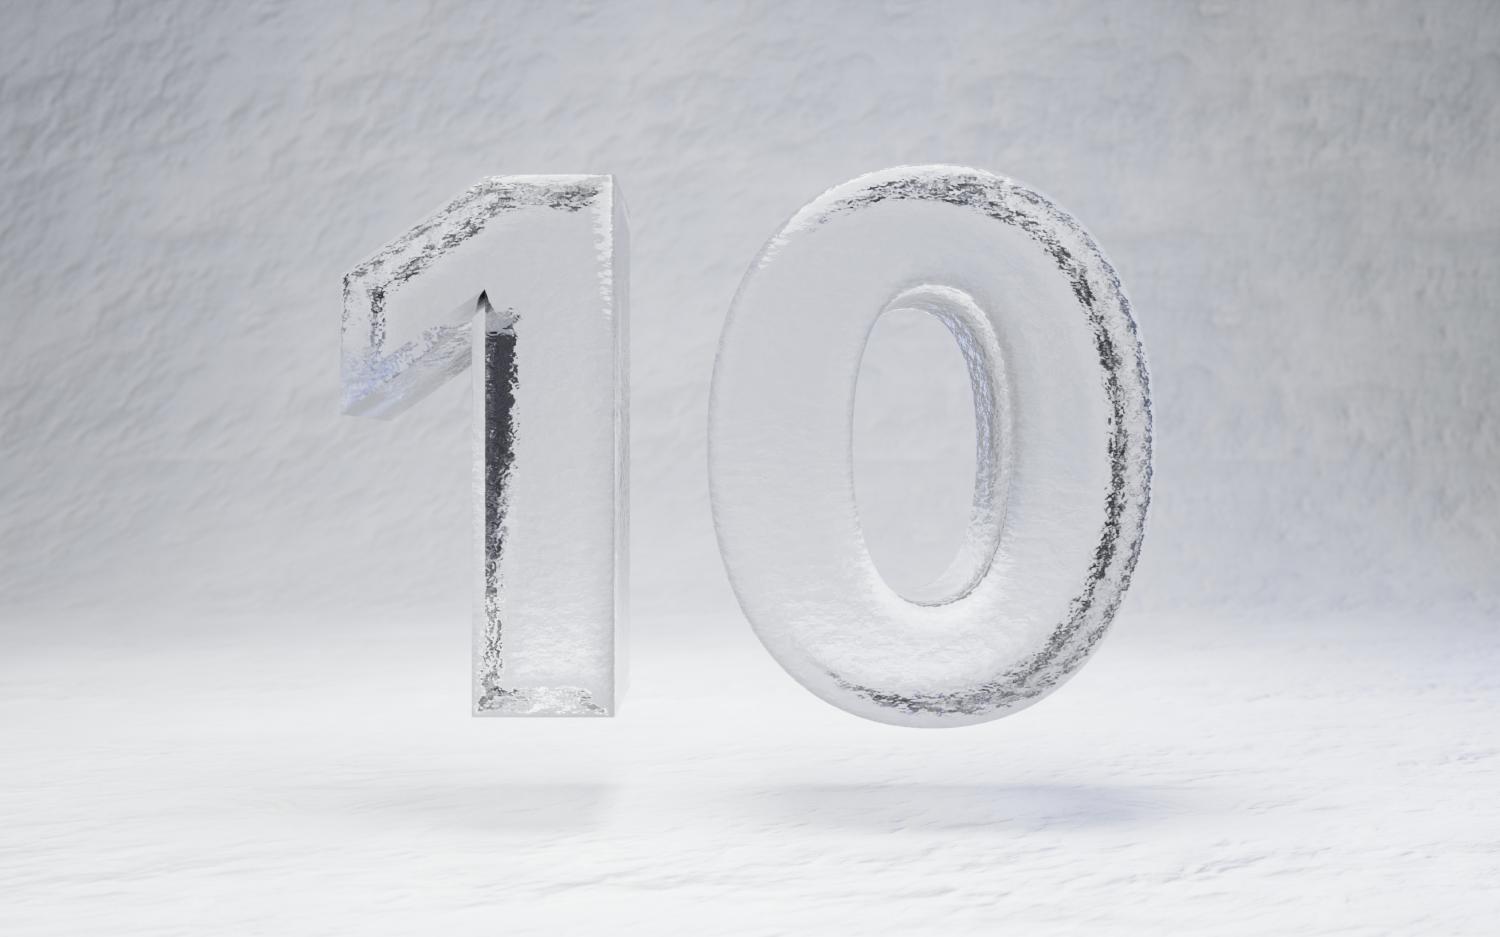 Number 10 in ice